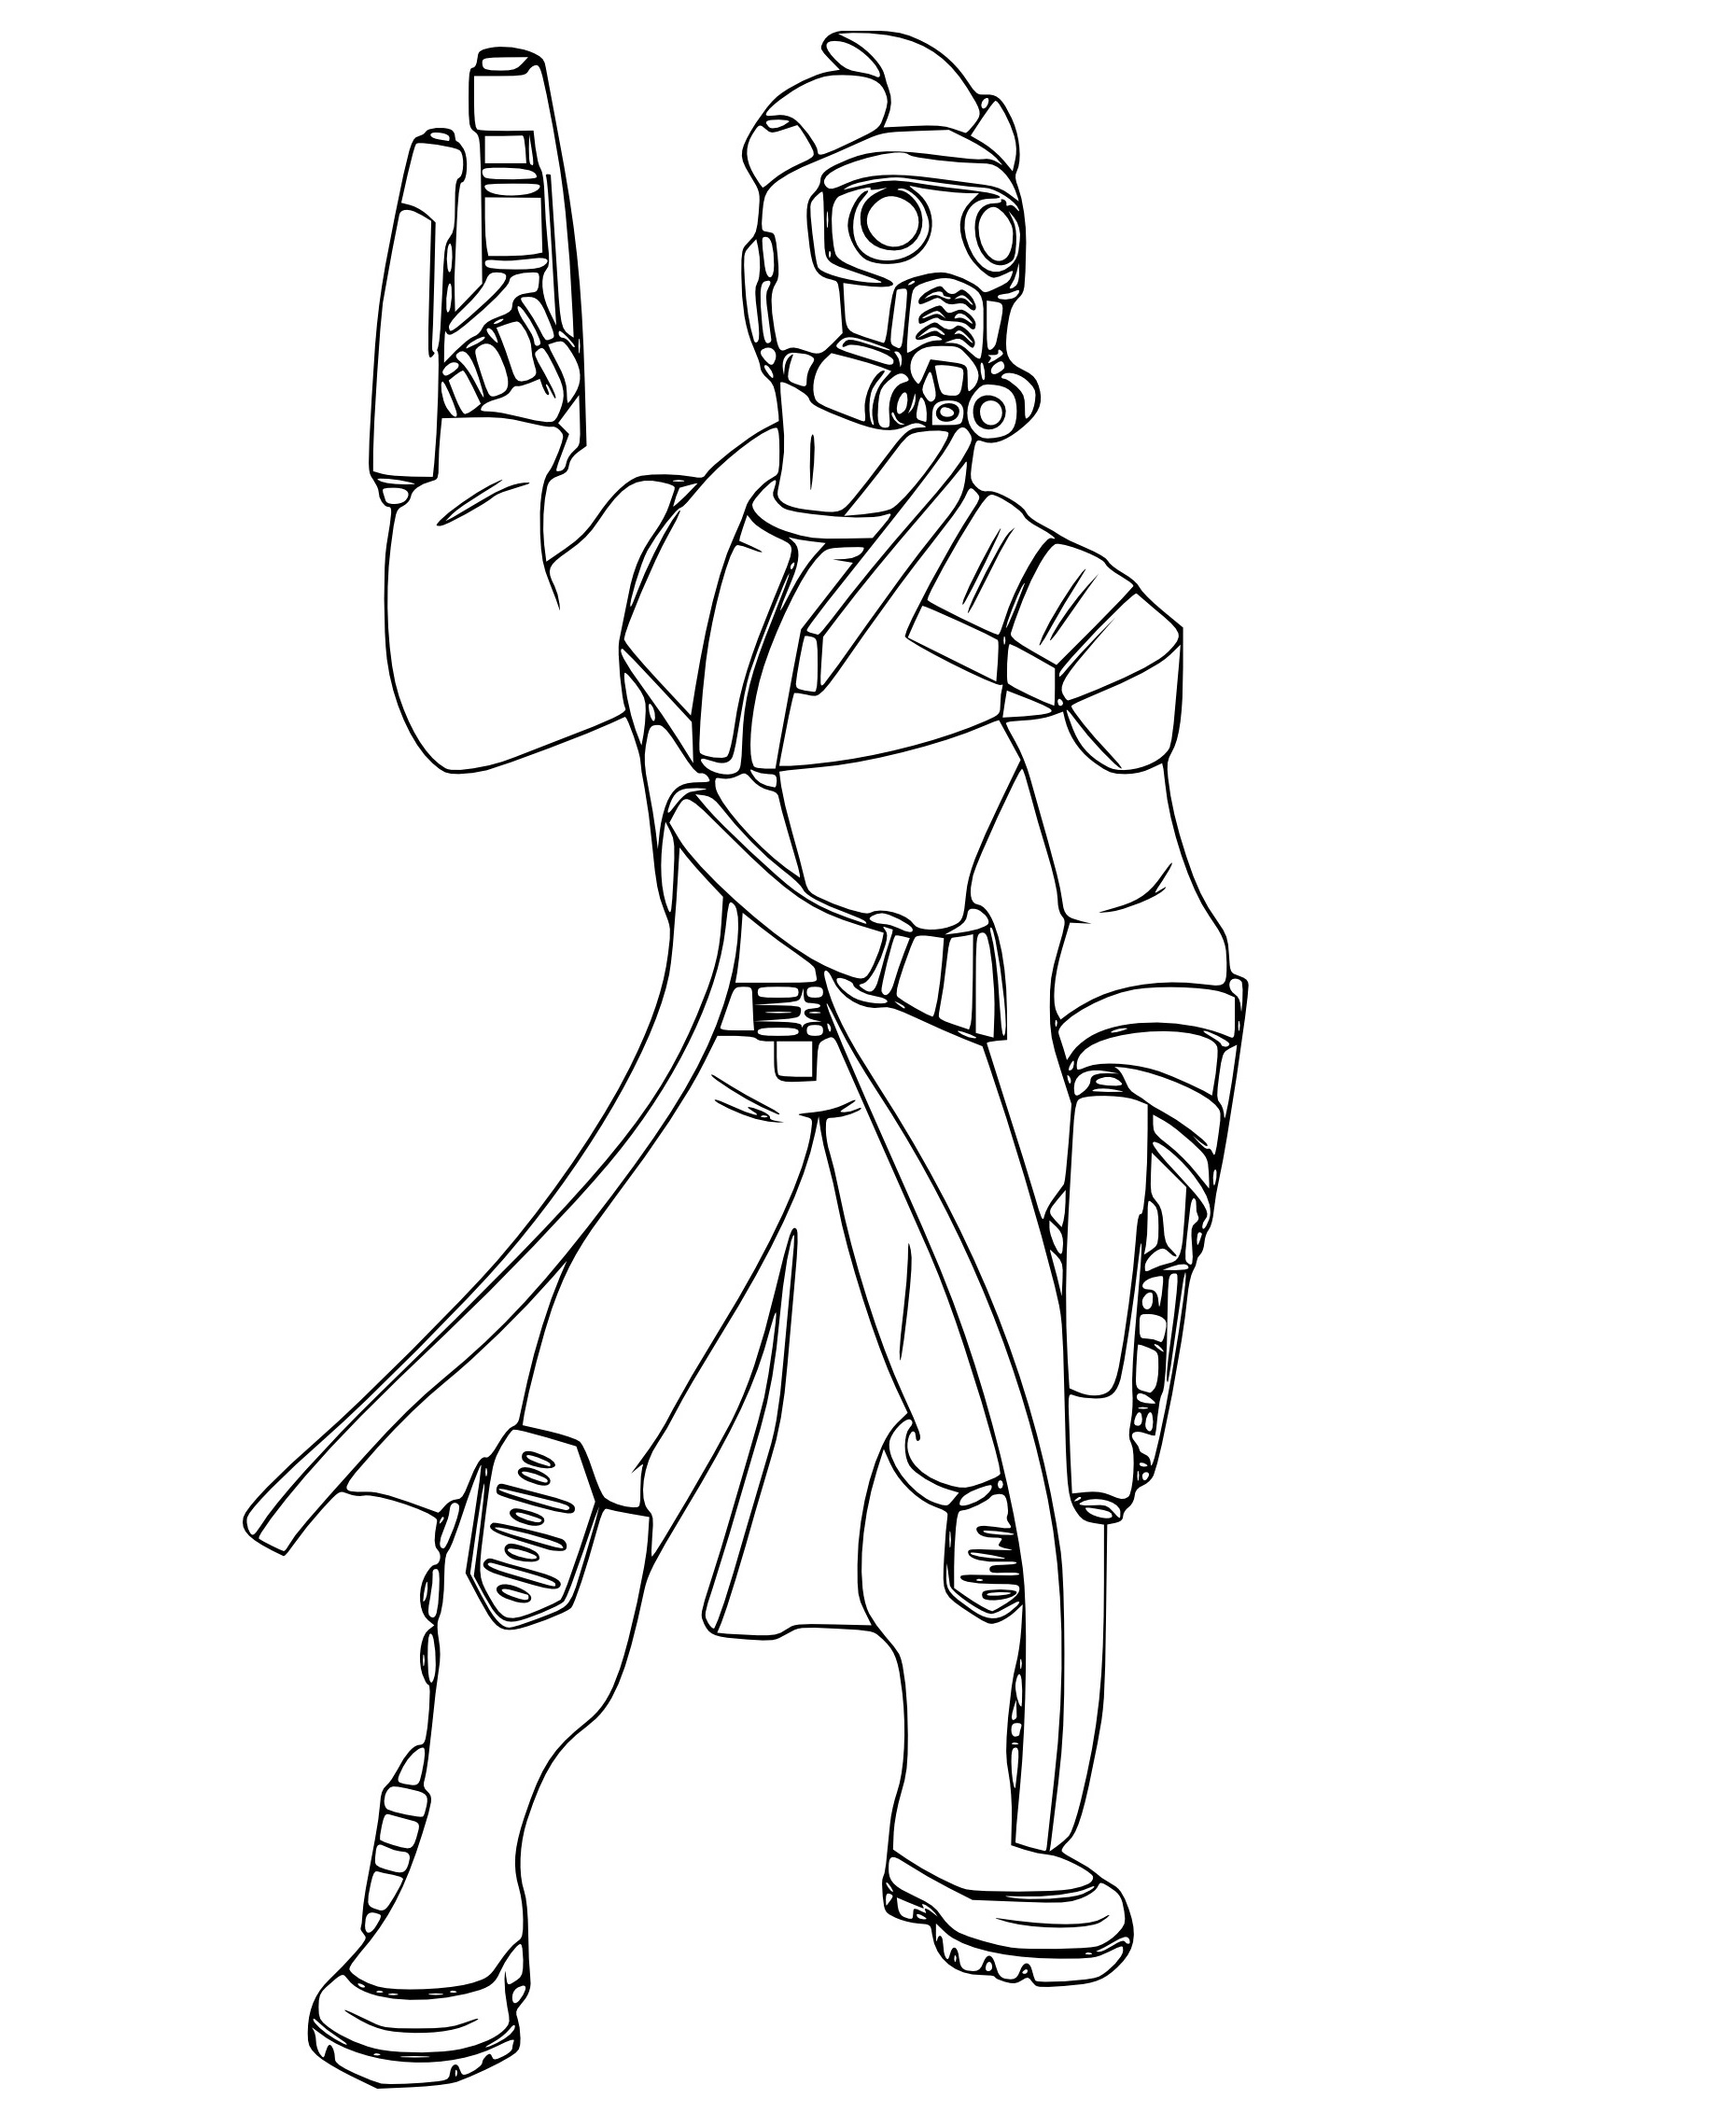 Star Lord With Guns Coloring Page - Free Printable Coloring Pages for Kids